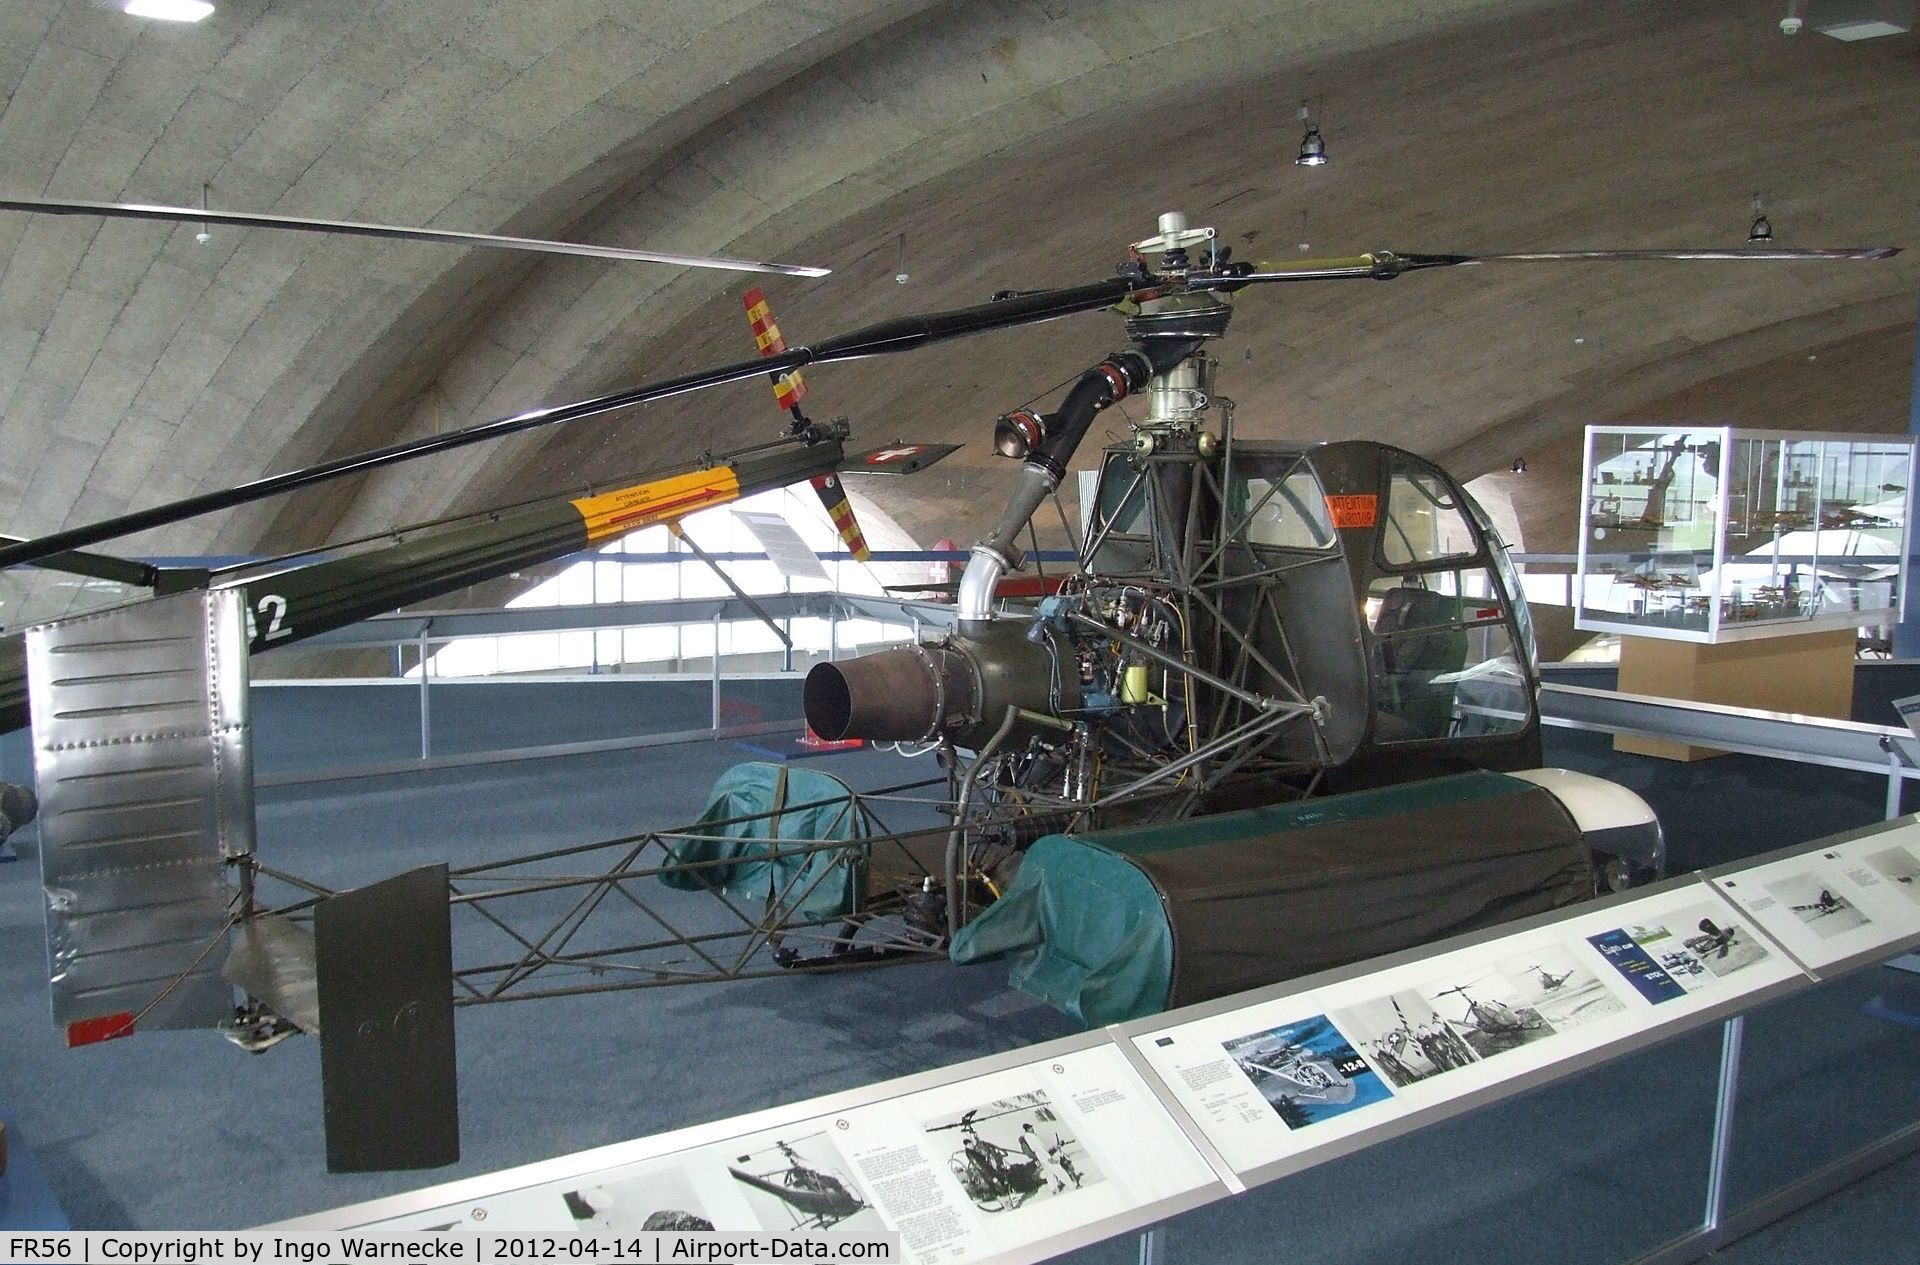 FR56, Sud Ouest SO.1221 Djinn C/N 38/FR56, Sud-Ouest SO.1221 Djinn at the Flieger-Flab-Museum, Dübendorf